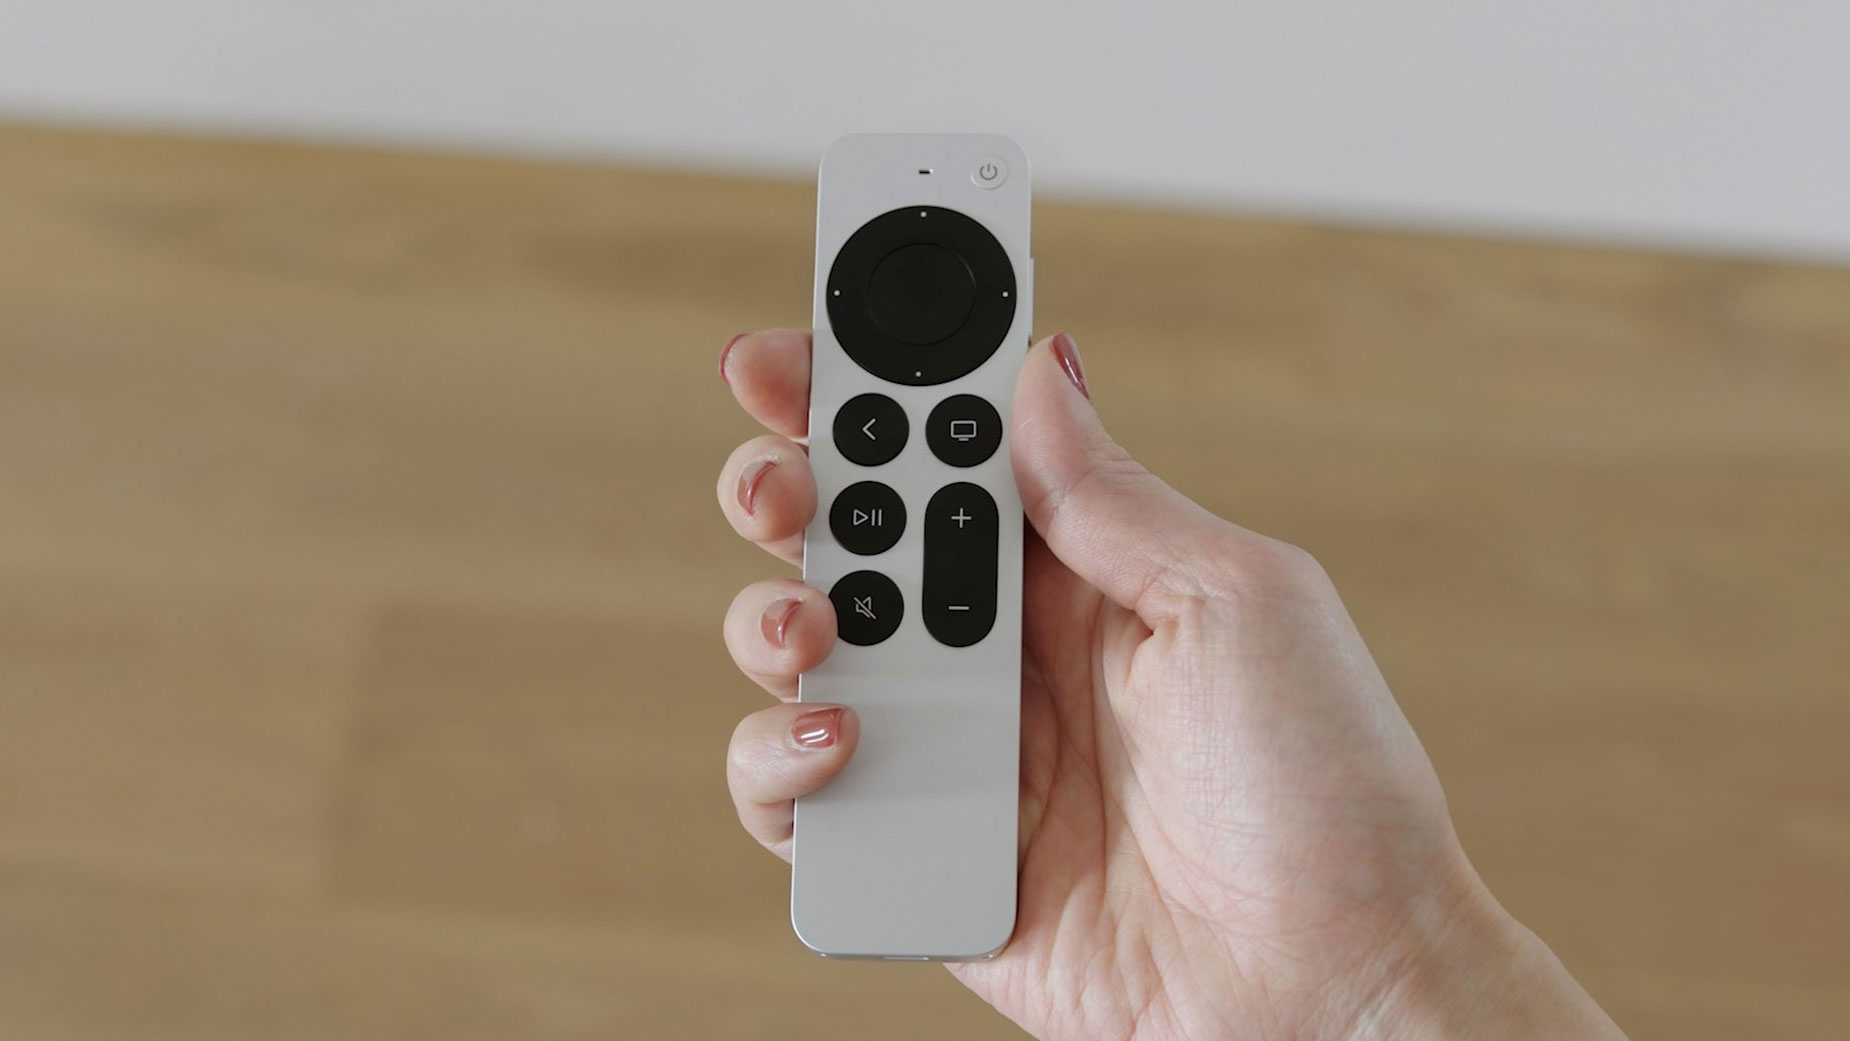 The new Apple TV 4K comes with a Siri Remote | TechCrunch